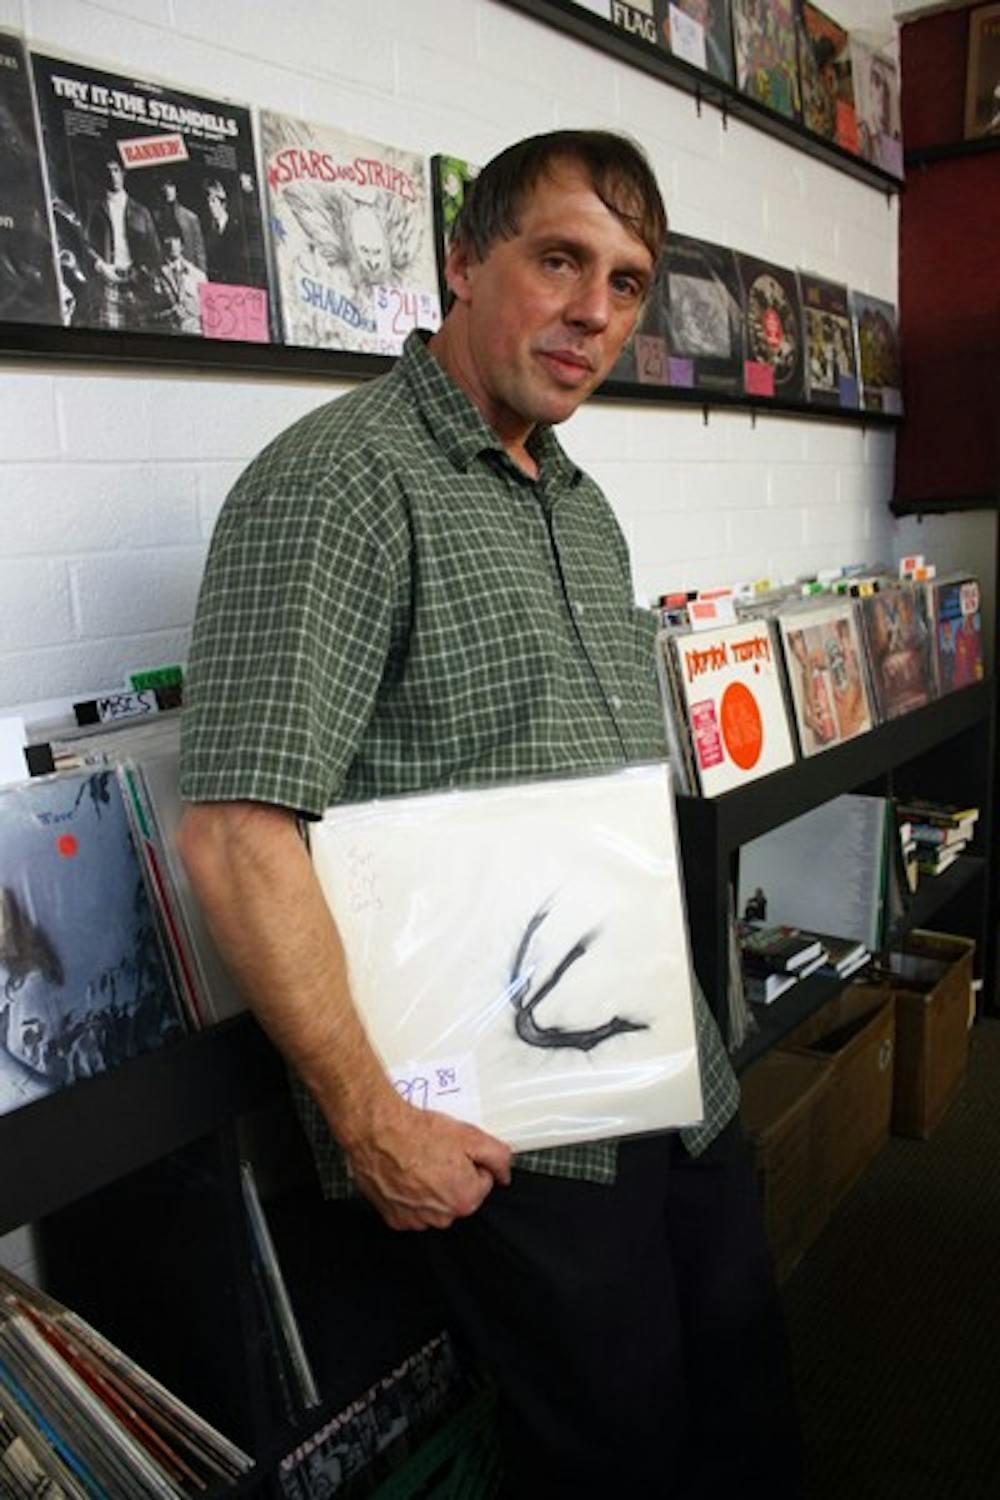 Although Eastside Records closed in 2010, owner Mike Pawlicki reopened the store under the name Ghosts of Eastside Records in January 2012. (Photo by Shawn Raymundo)